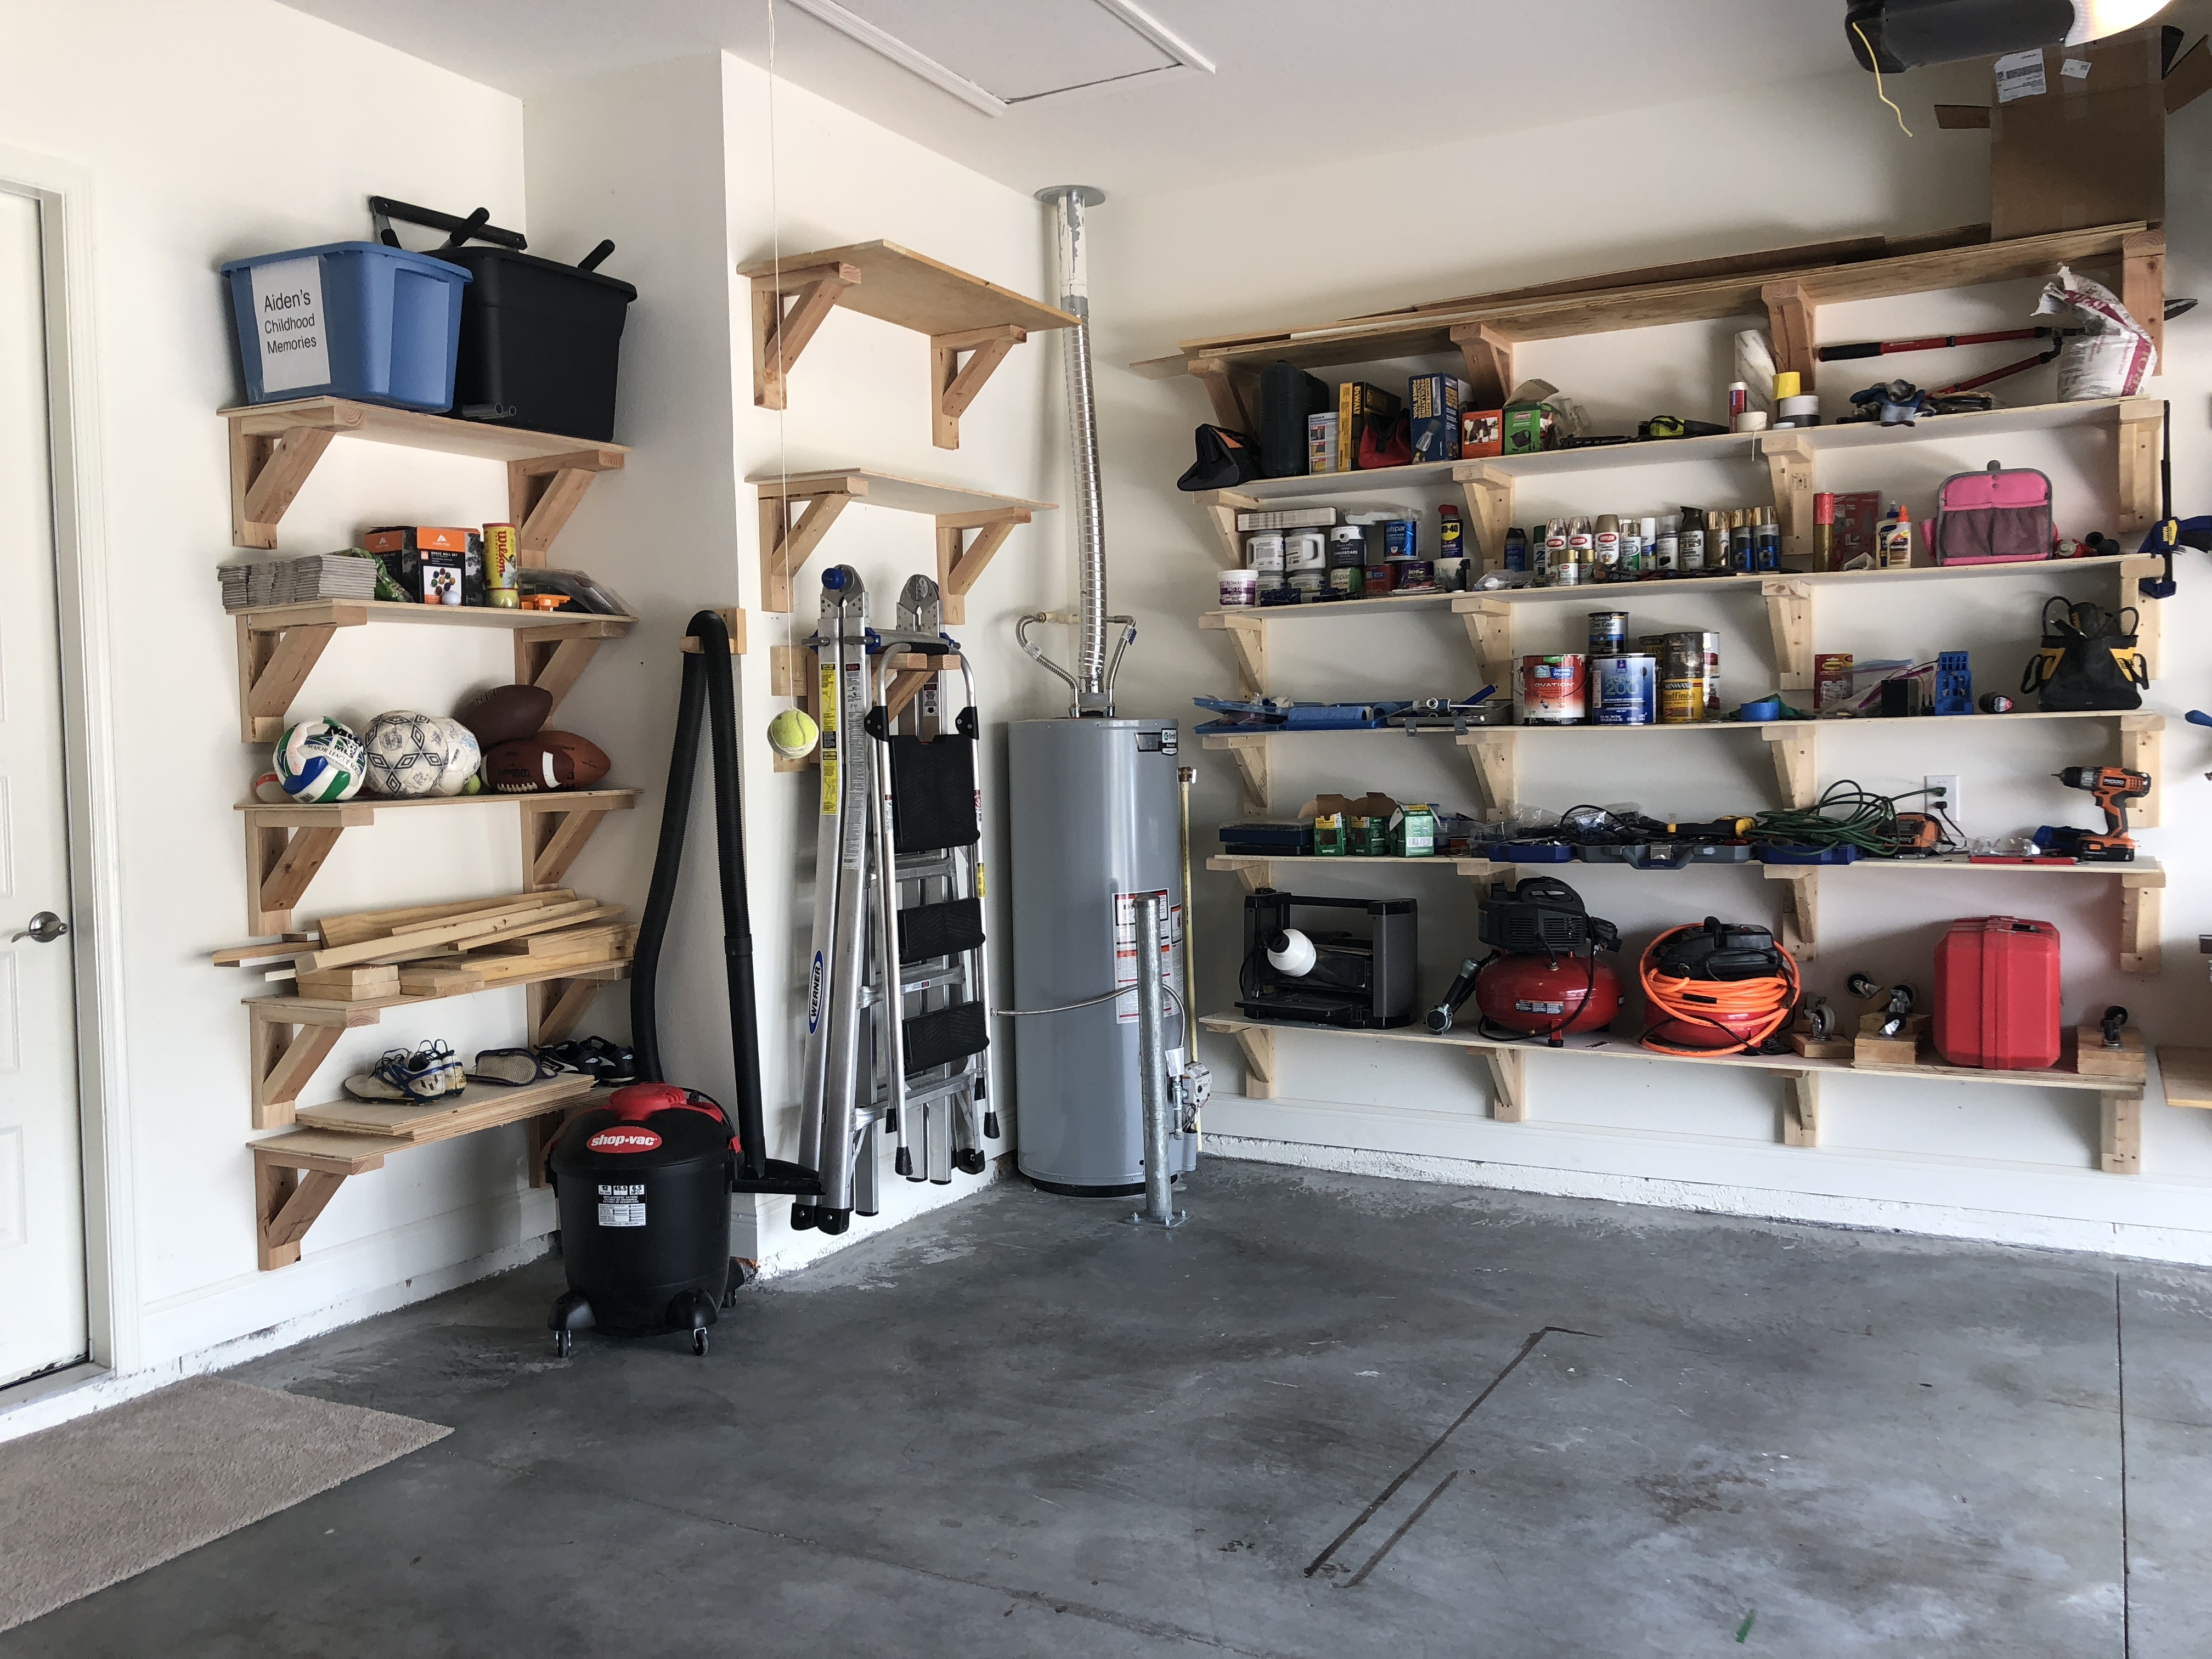 Garage Makeover with DIY Shelving - Frills and Drills